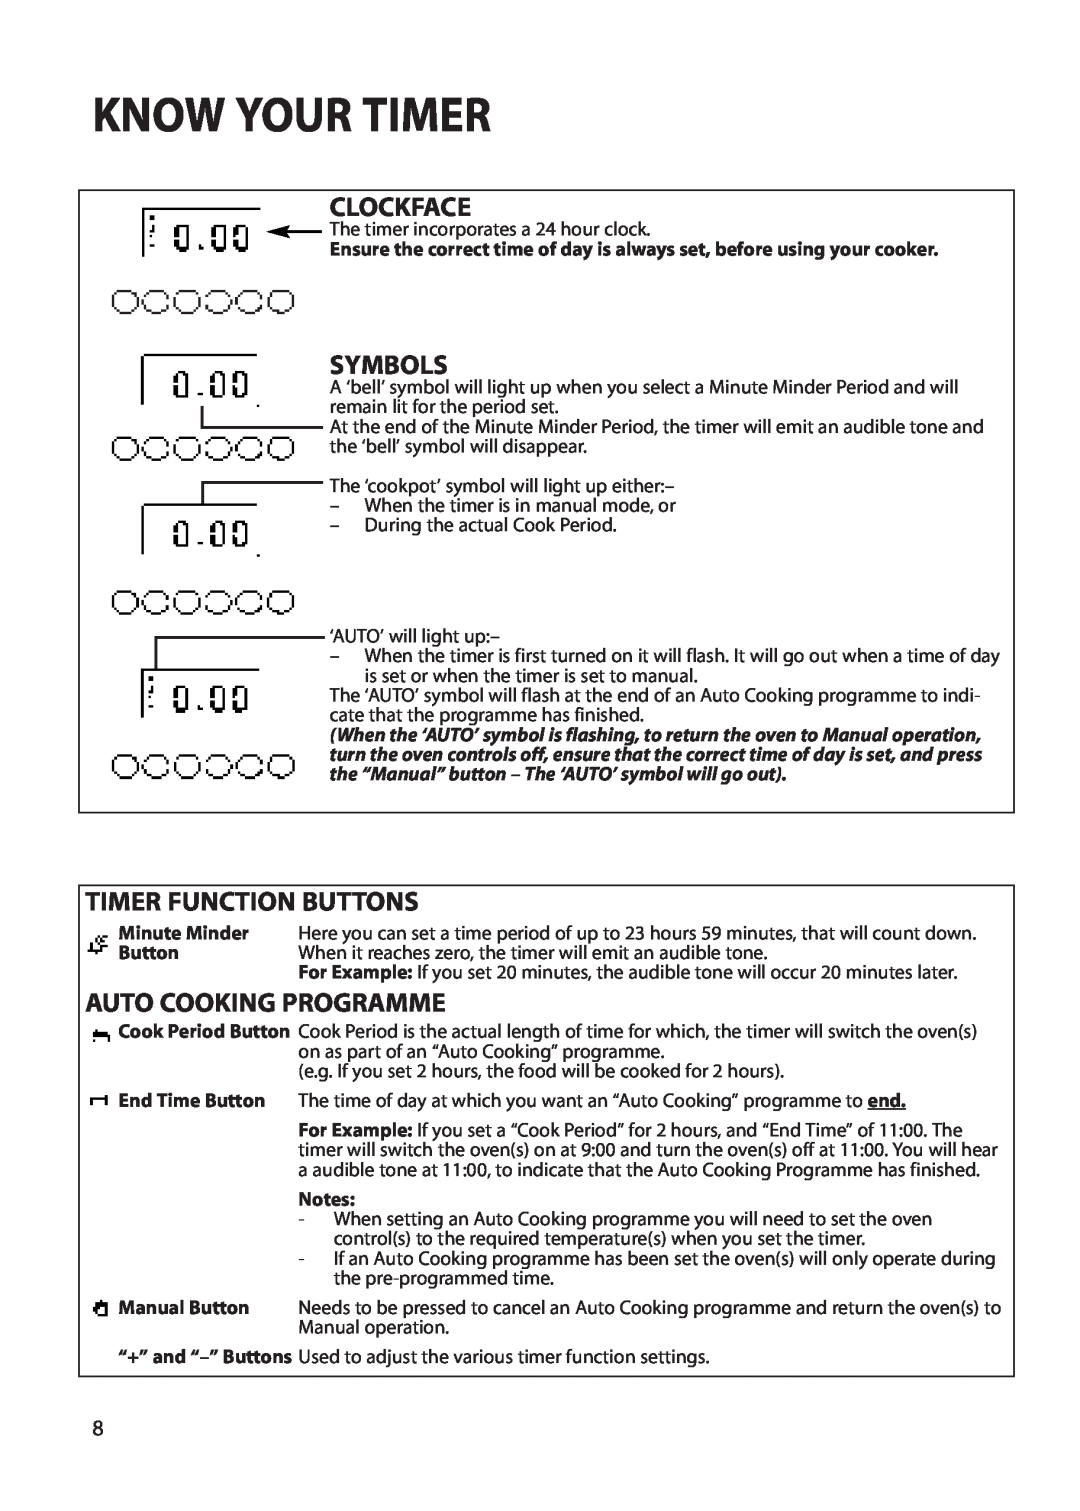 Creda S230G installation instructions Know Your Timer, Clockface, Symbols, Timer Function Buttons, Auto Cooking Programme 